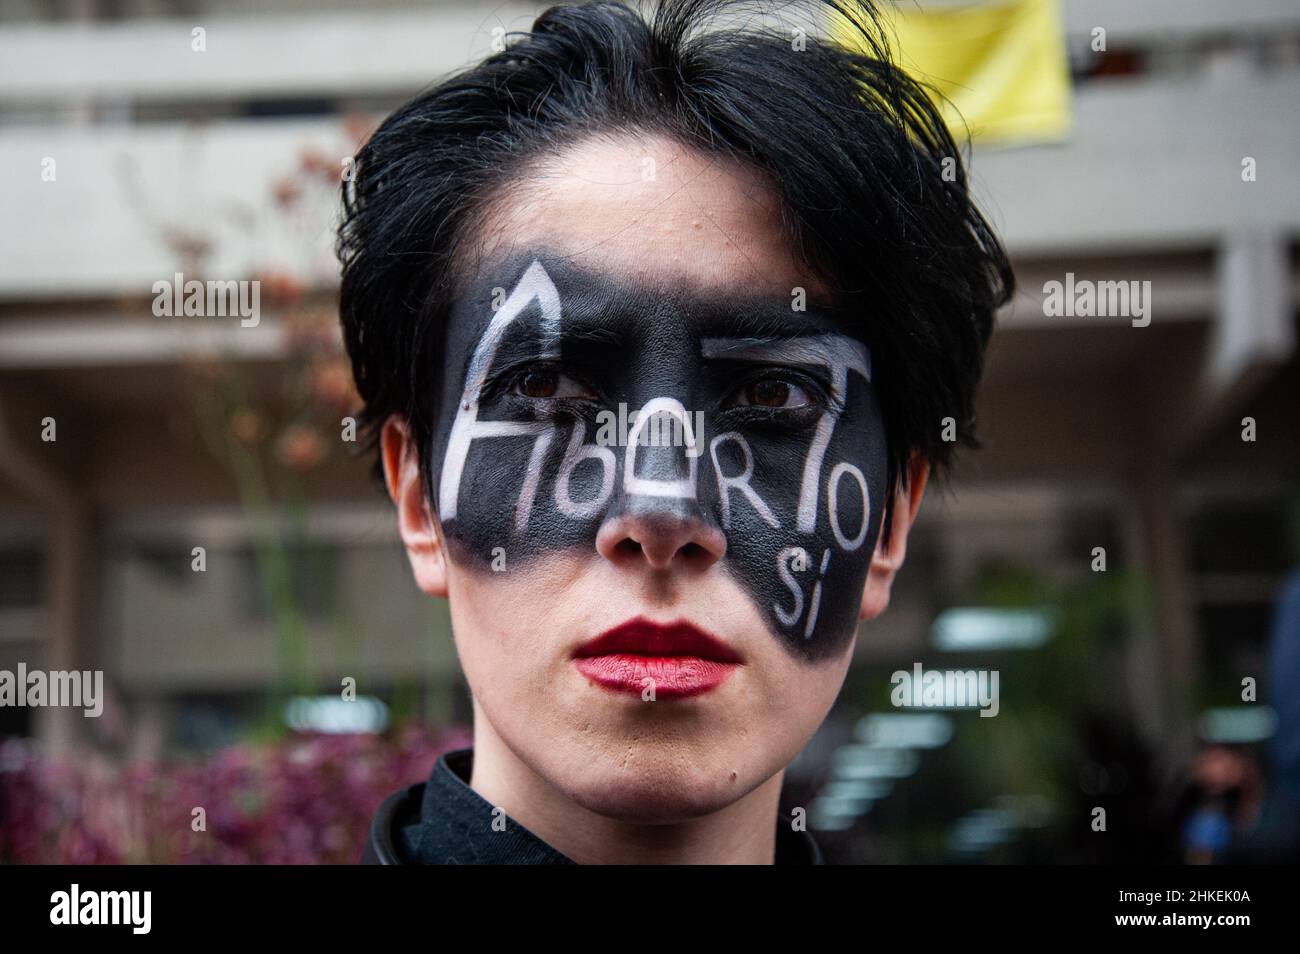 Bogota, Colombia. 03rd Feb, 2022. A Pro-Choice supporter of decriminalization of abortions demonstrate with her face painted with the message 'Yes to Abortions' in spanish, outside the Justice Palace as the Constitutional Court debate on the decriminalization of abortion for up to the week 24 of gestation on February 03, 2022 in Bogota, Colombia. Credit: Long Visual Press/Alamy Live News Stock Photo